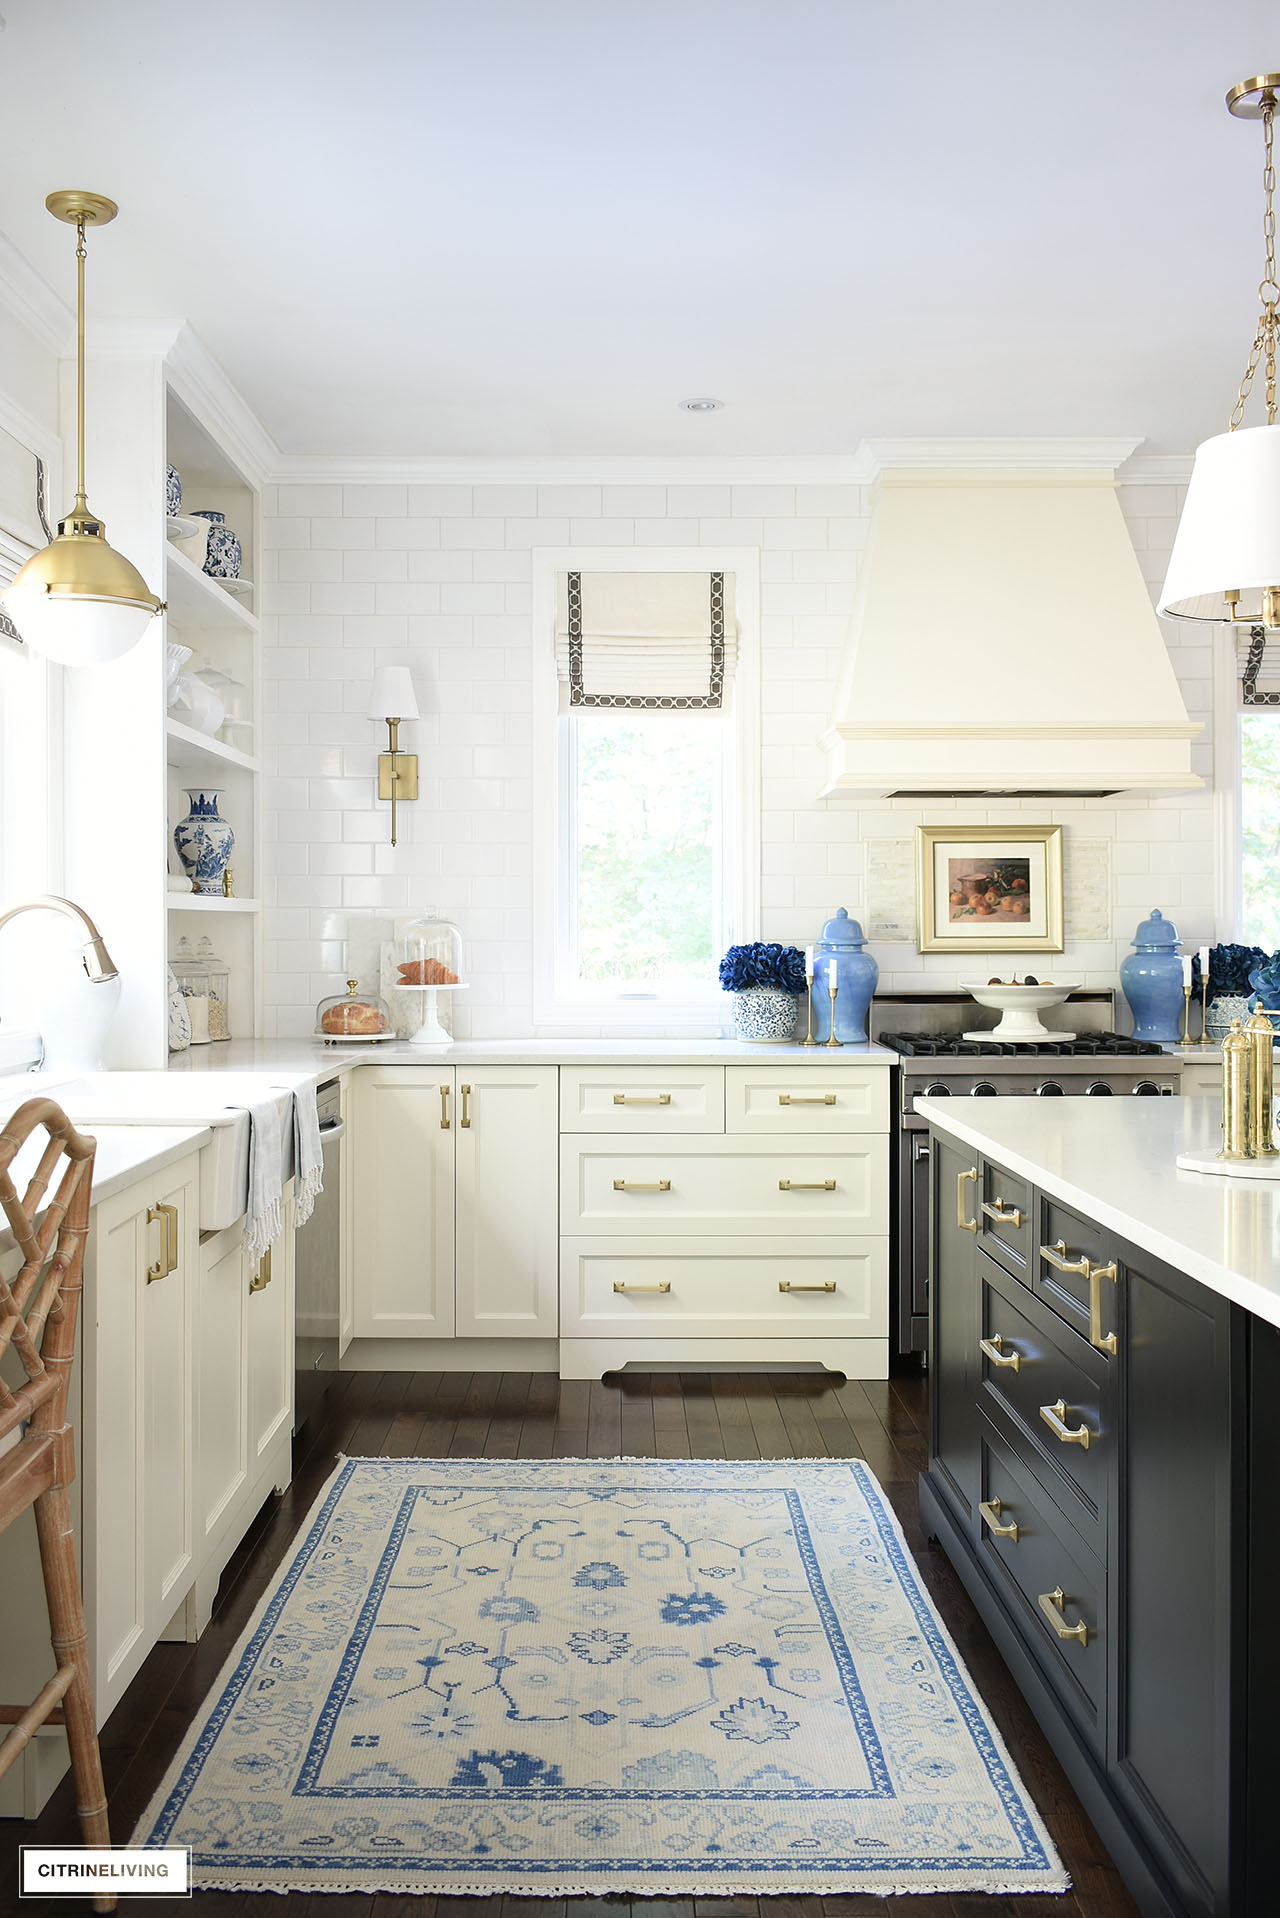 Gorgeous fall kitchen decorated with blue accents, blue florals, gold touches and rustic elements.